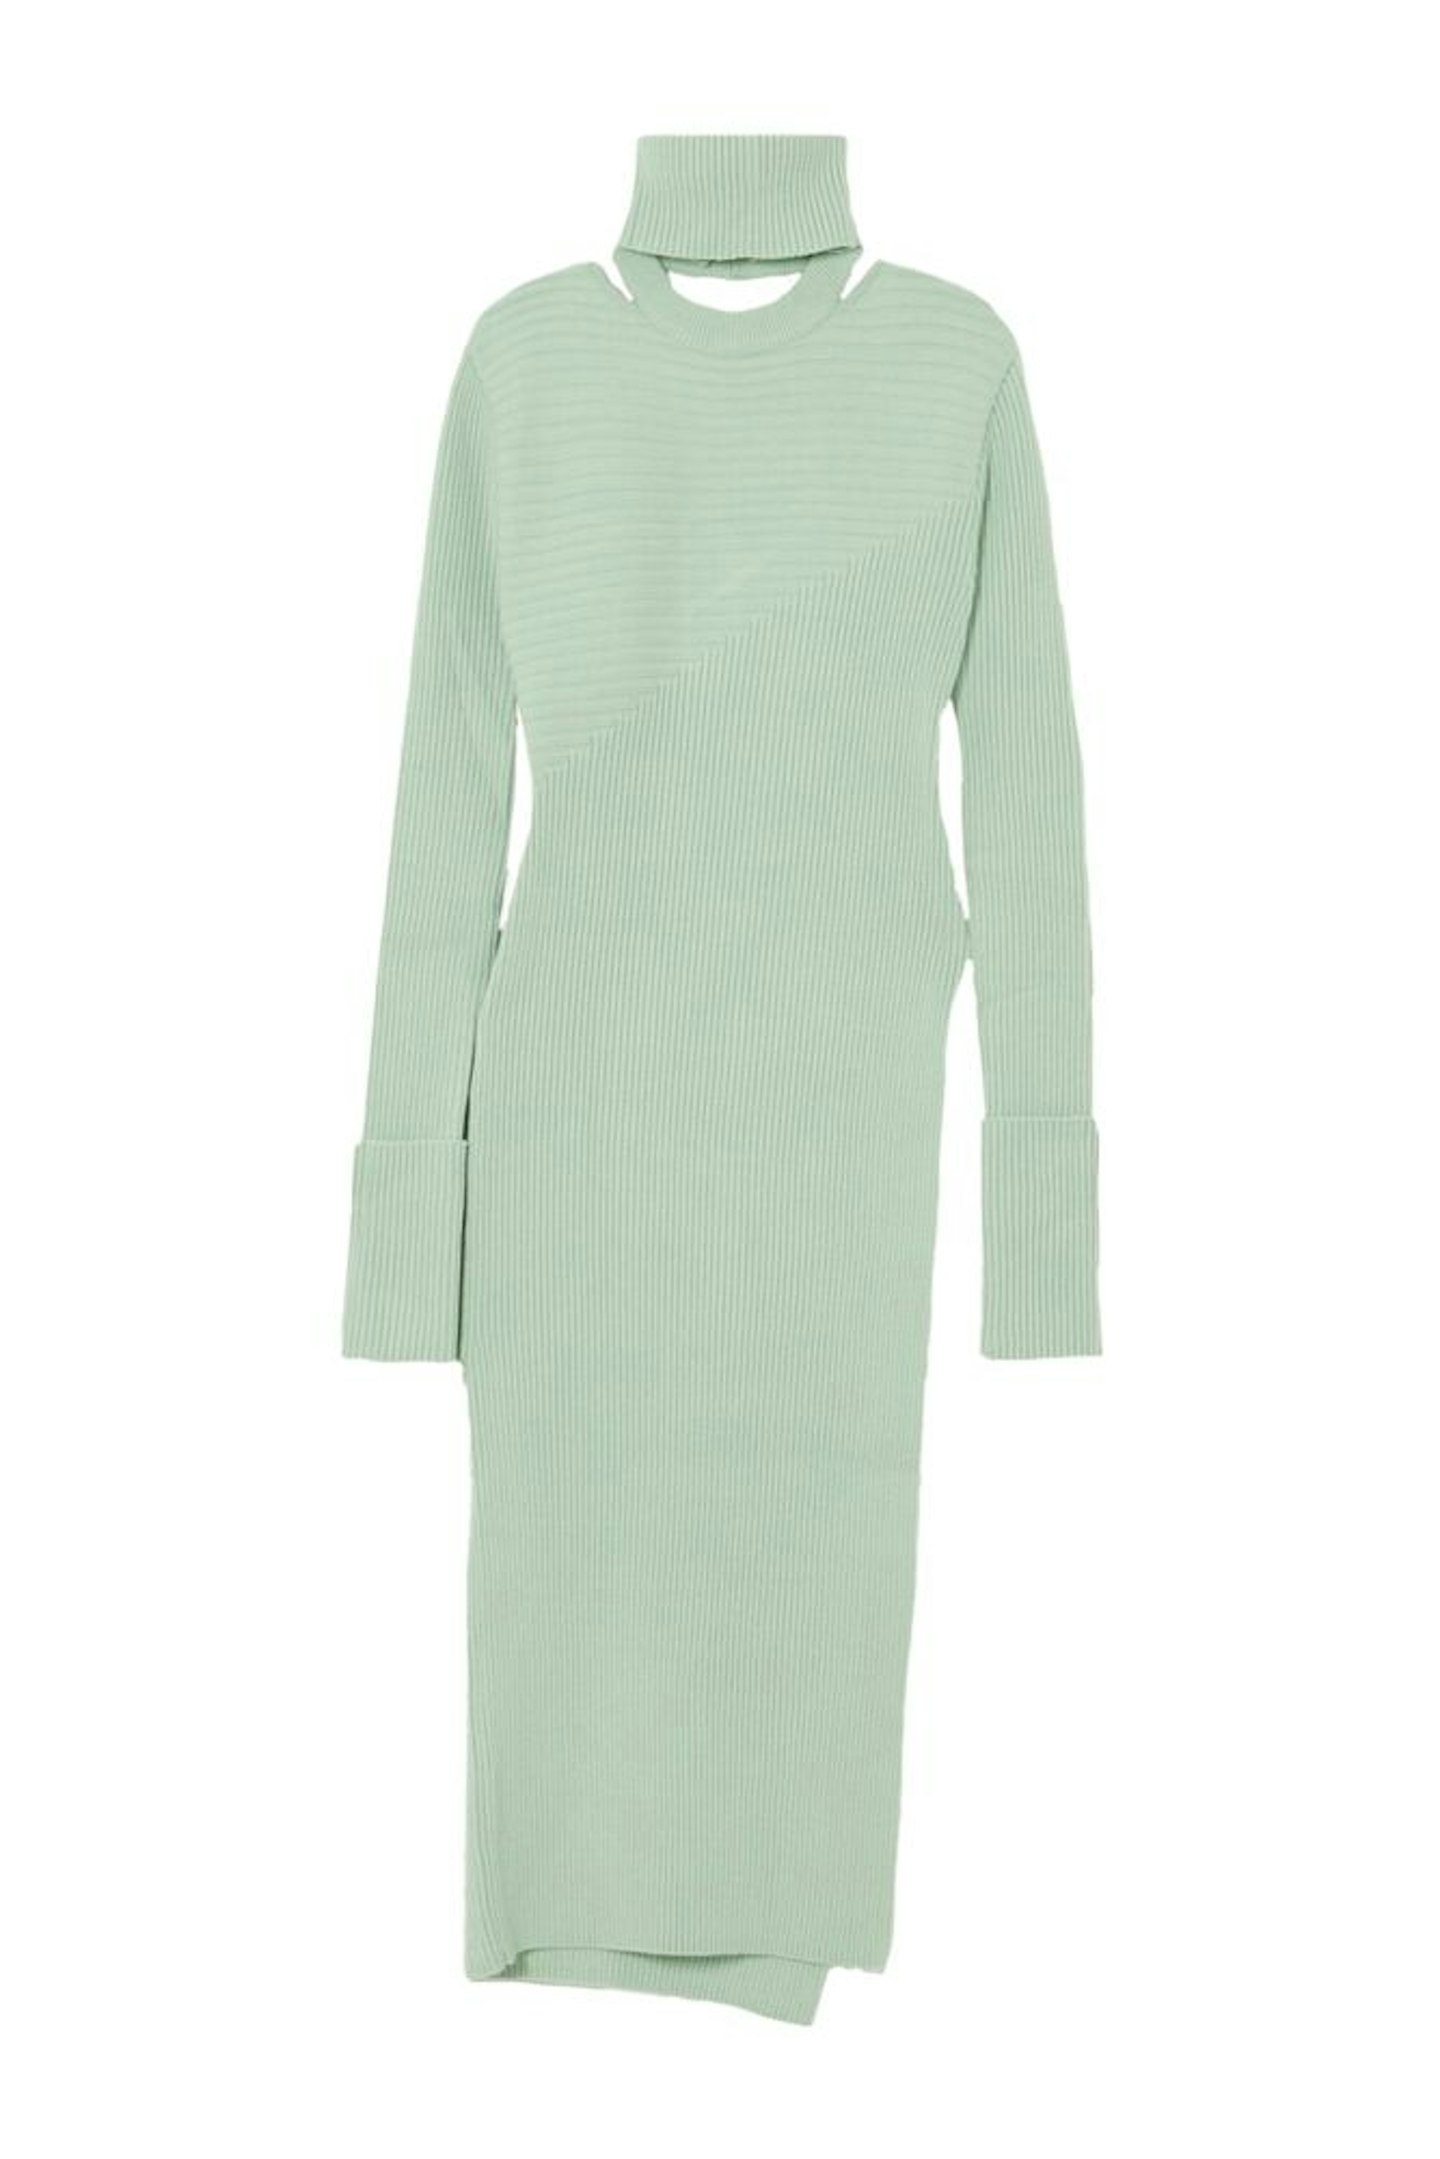 Andersson Bell, Daisy Cut-out Turtlneck Tunic, £225.06 at Net-a-Porter